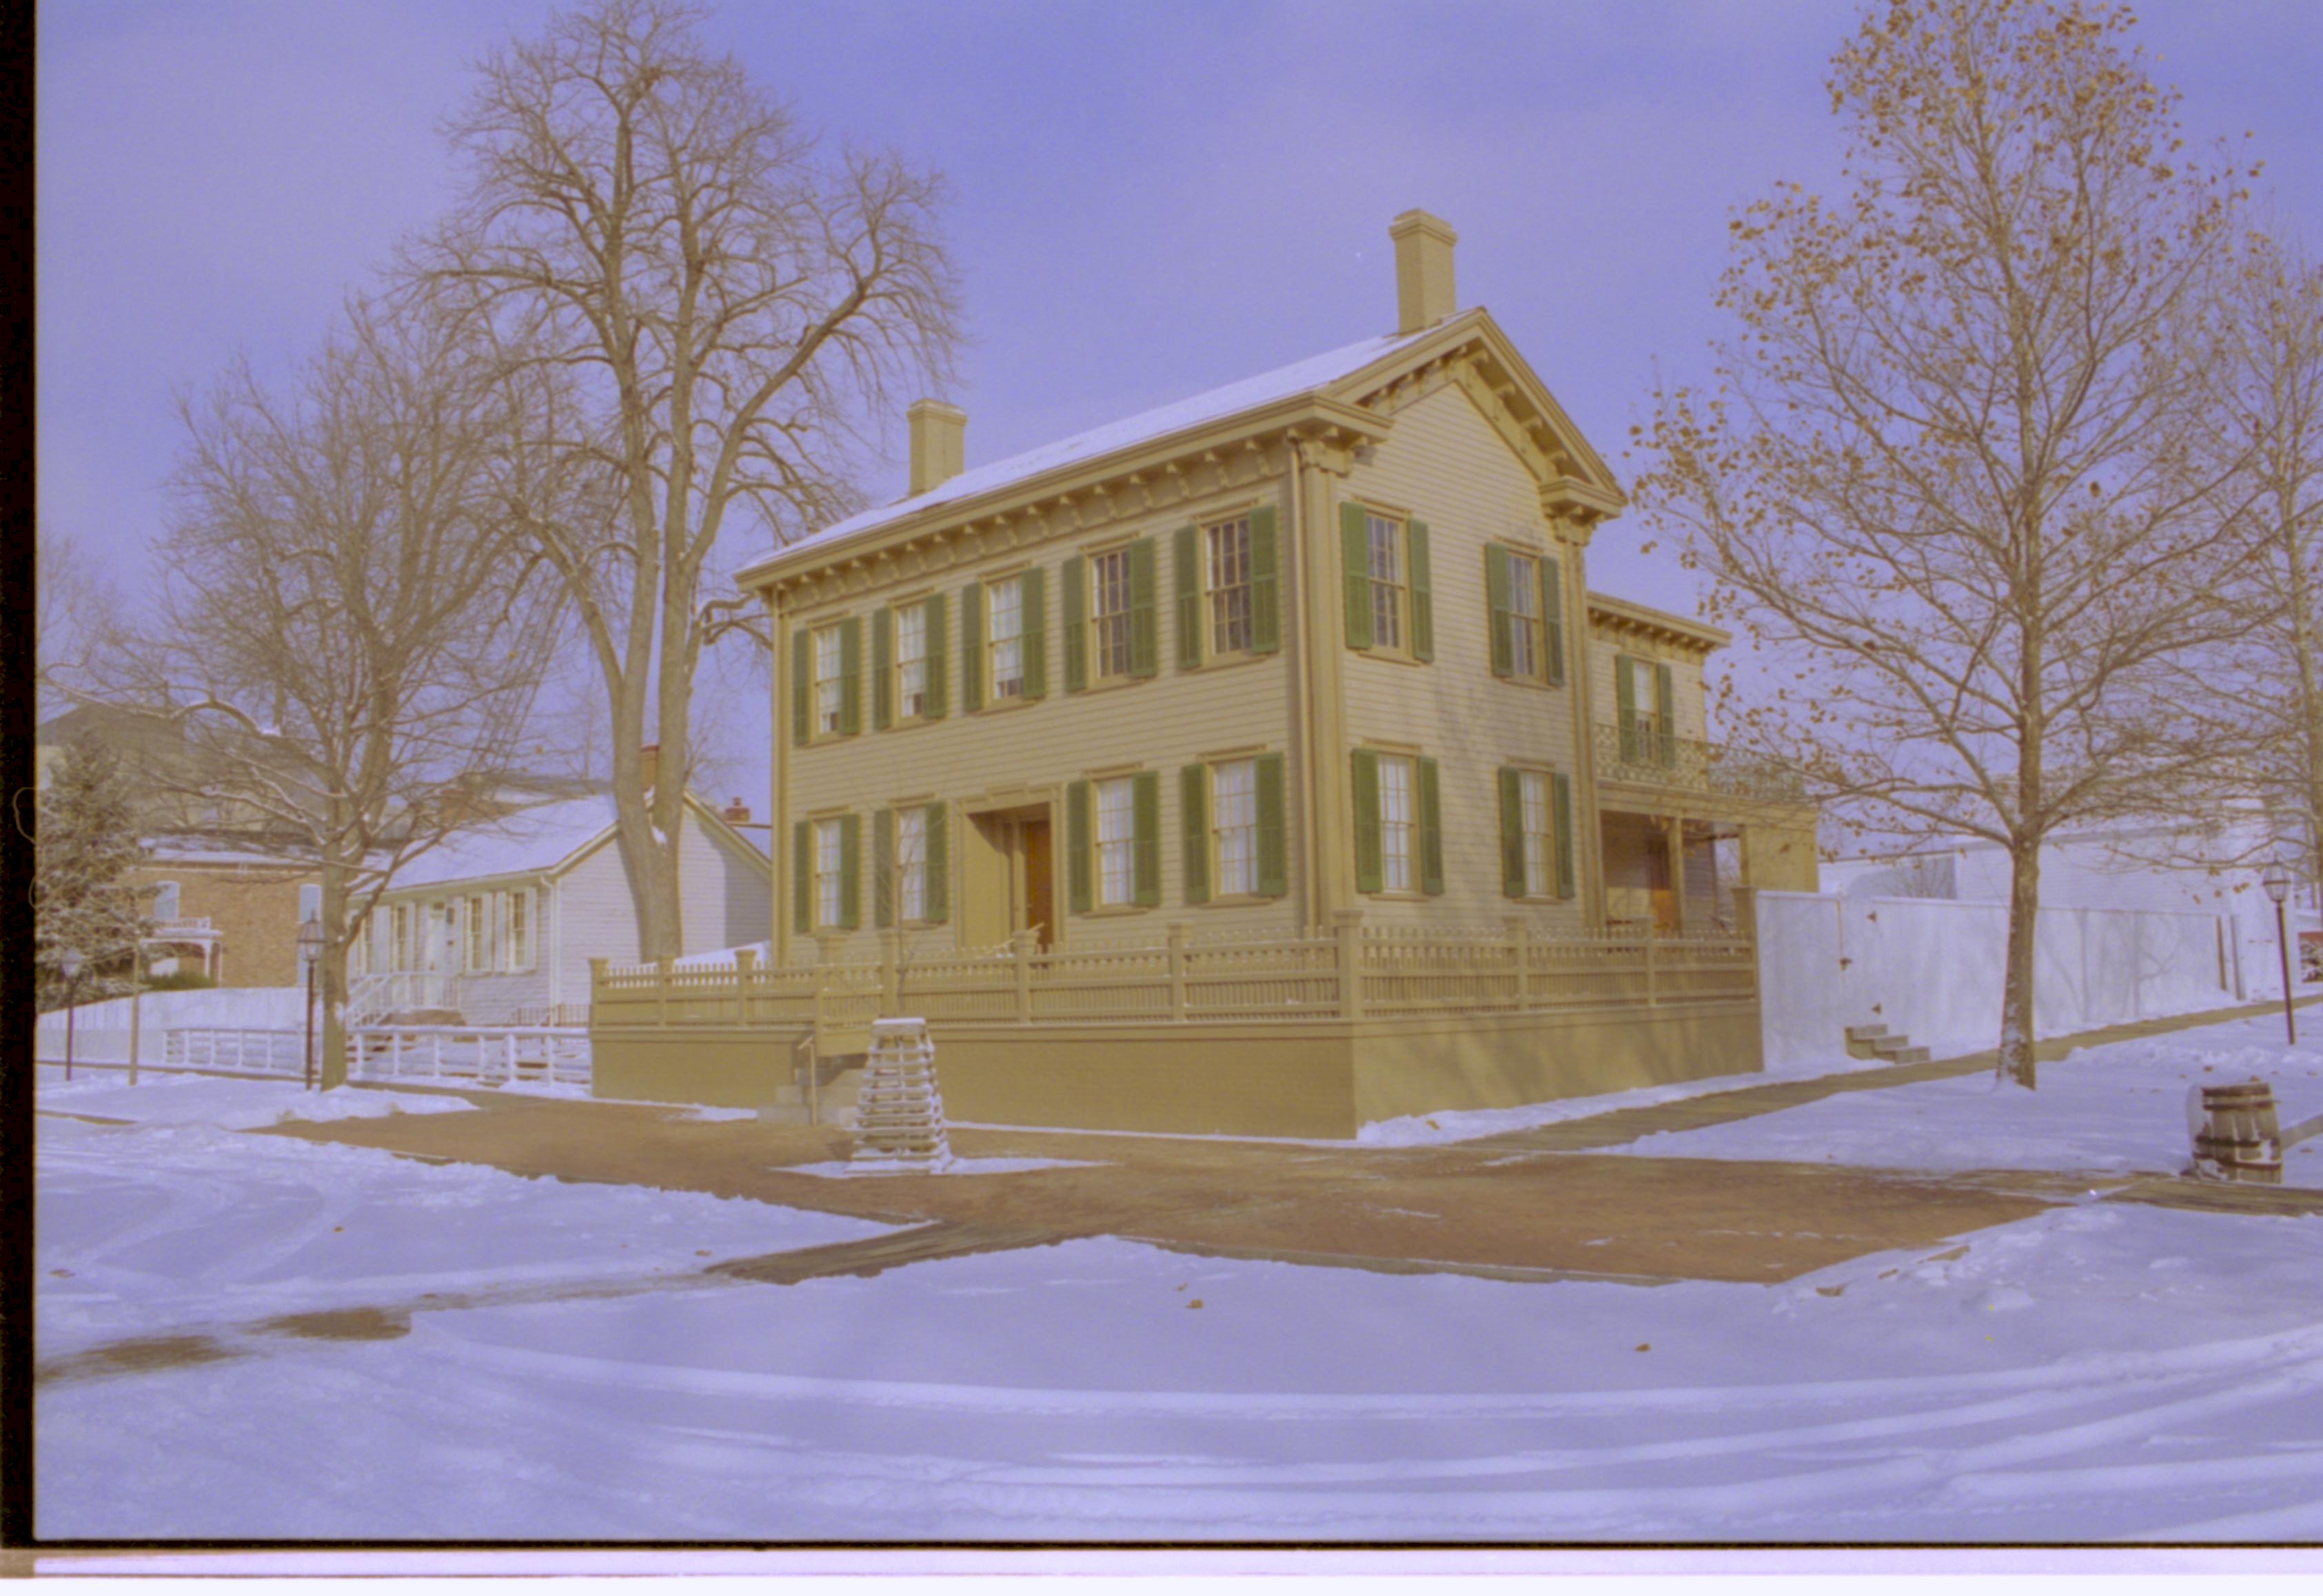 Lincoln Home in snow, cleared brick plaza in front, elm tree in cage on plaza. Corneau House on left, Conference Center in brick on far left. Lincoln Barn and Lincoln Woodshed visible behind fence on far right. Trash barrel in gutter along Jackson Street Looking Northeast from 8th and Jackson Street intersection snow, Lincoln Home, Corneau, Conference Center, Lincoln Barn, Lincoln Woodshed, 8th Street, Jackson Street, brick plaza, elm tree